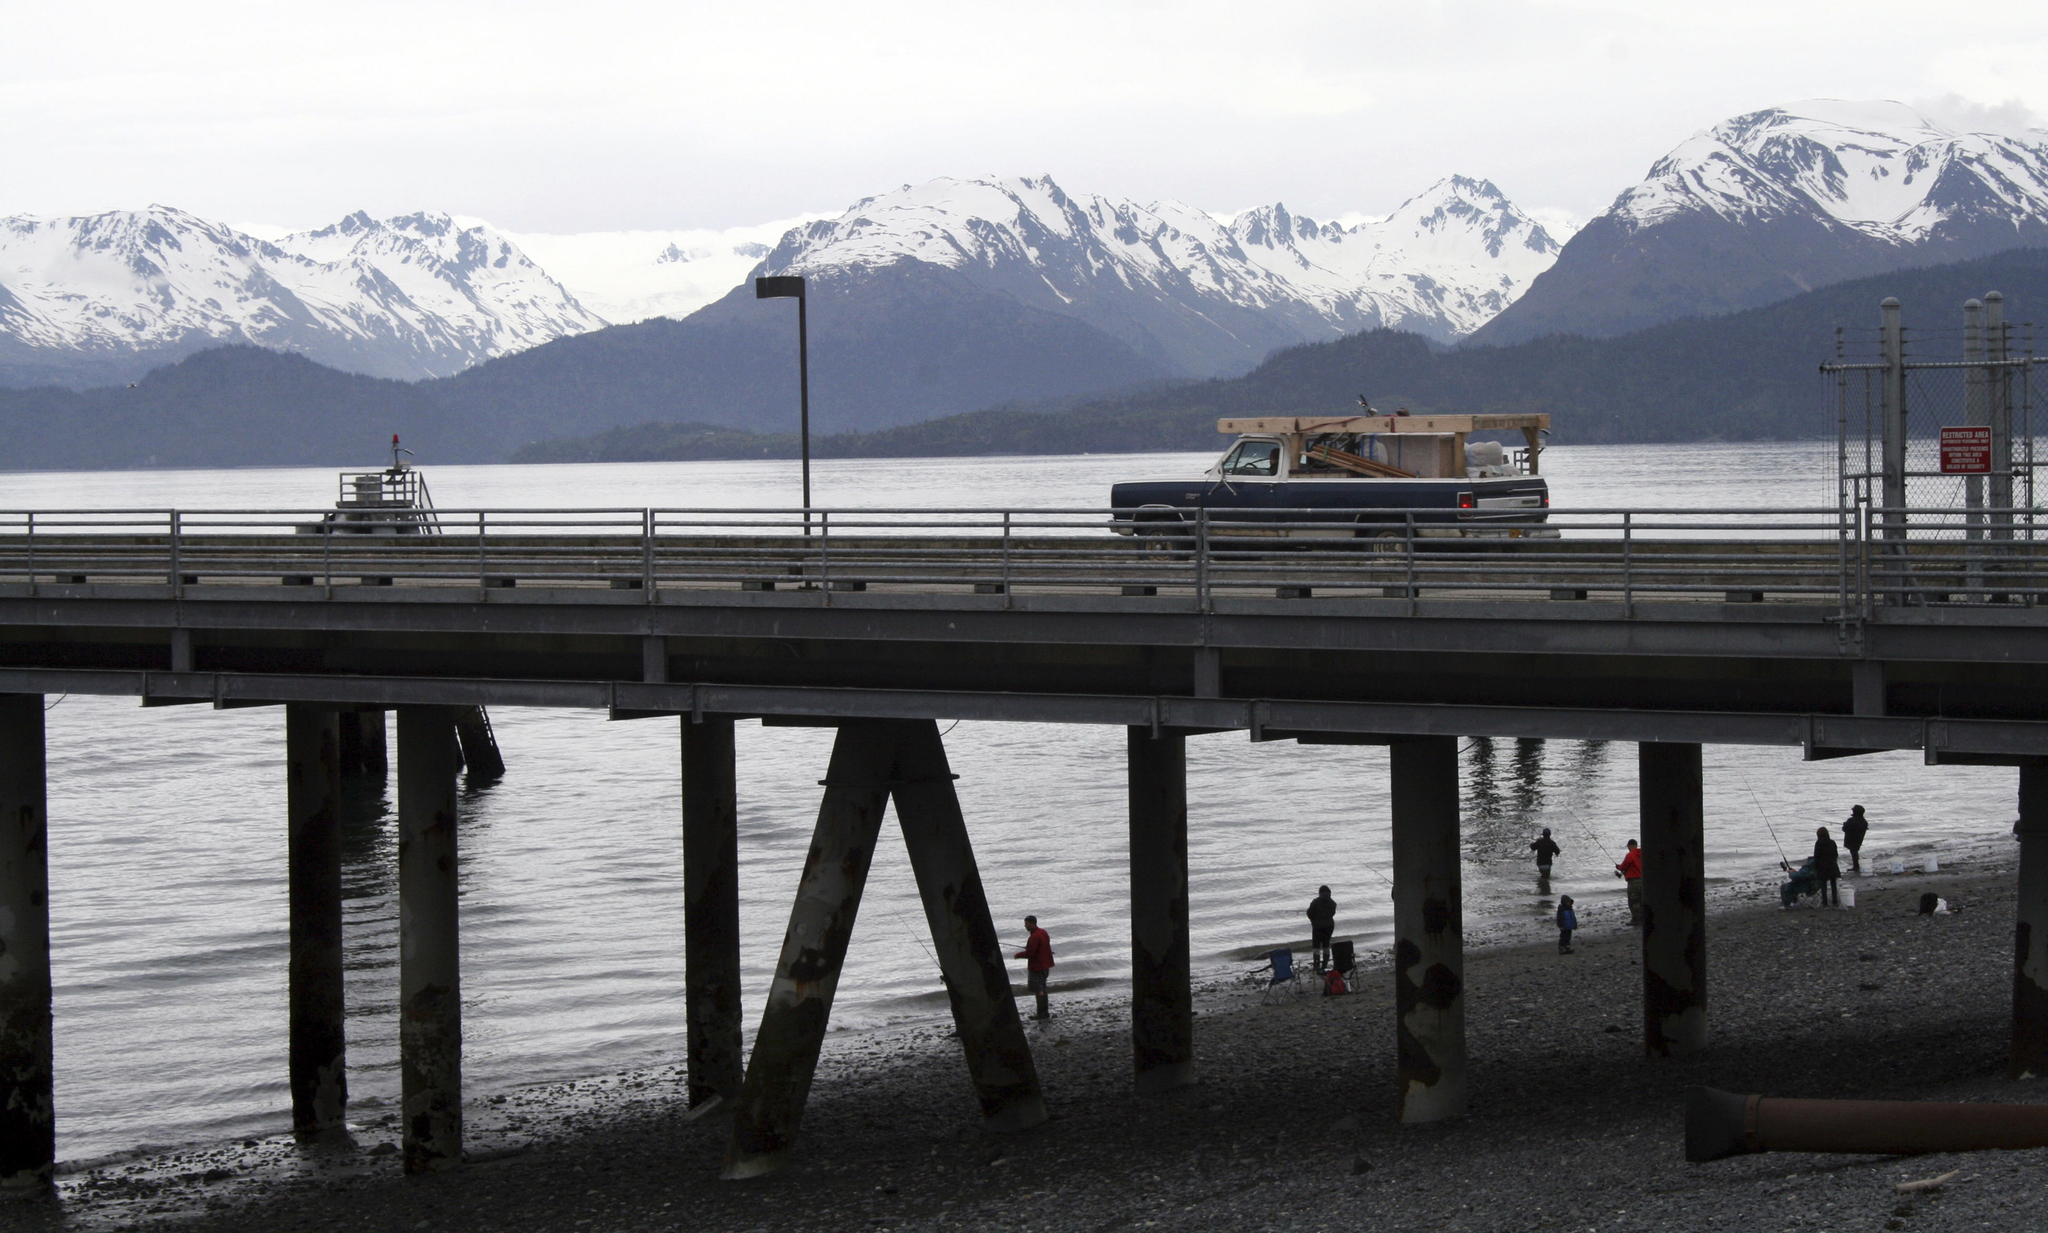 In this May 24, 2015 photo a vehicle drives on a pier to be loaded onto an Alaska state ferry while people fish underneath the pier in Homer. The fishing town is the latest U.S. city to consider affirming its commitment to inclusion amid national concerns about the treatment of immigrants, religious minorities and others. Homer city leaders are expected to weigh a resolution Monday, Feb. 27, 2017, that says Homer will resist any efforts to profile “vulnerable populations.” (Mark Thiessen | The Associated Press)